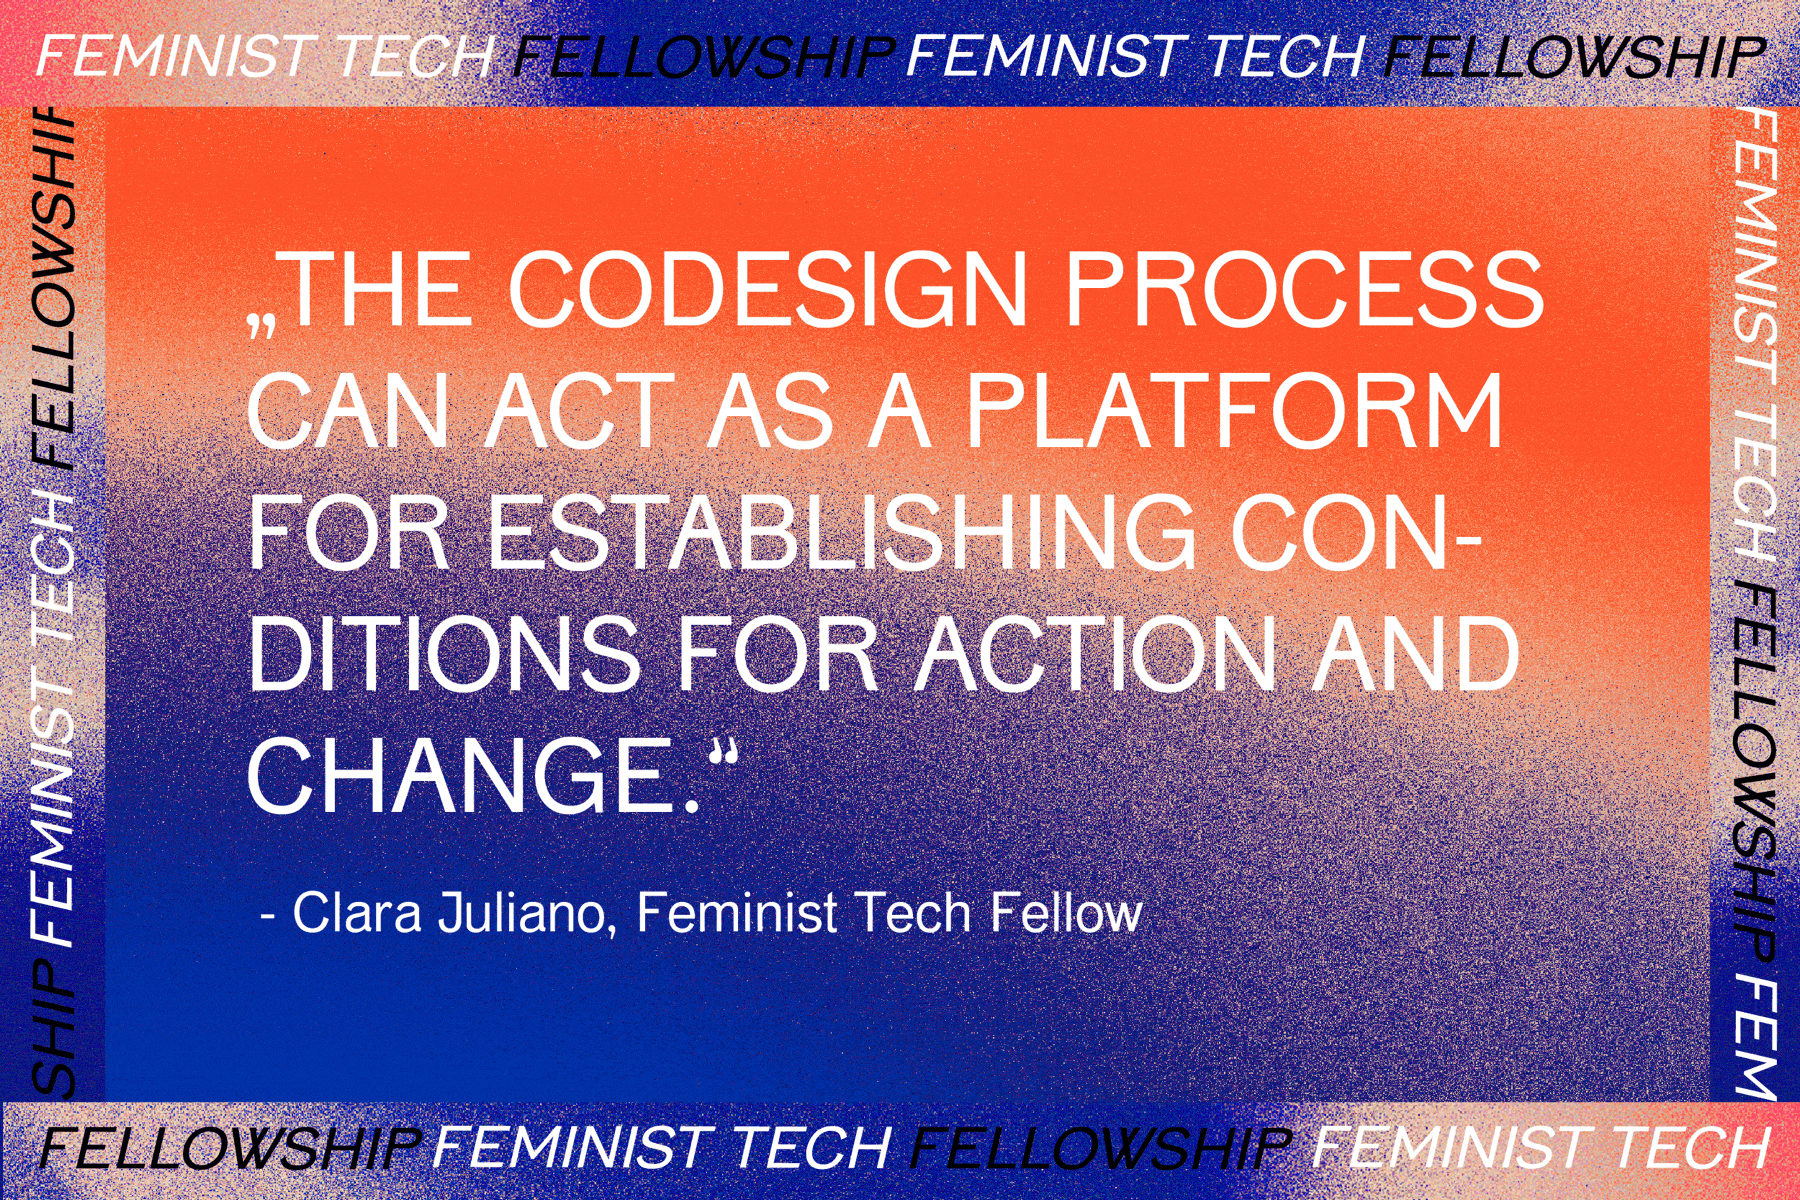 The codesign process can act as a platform for establishing conditions for action and change.